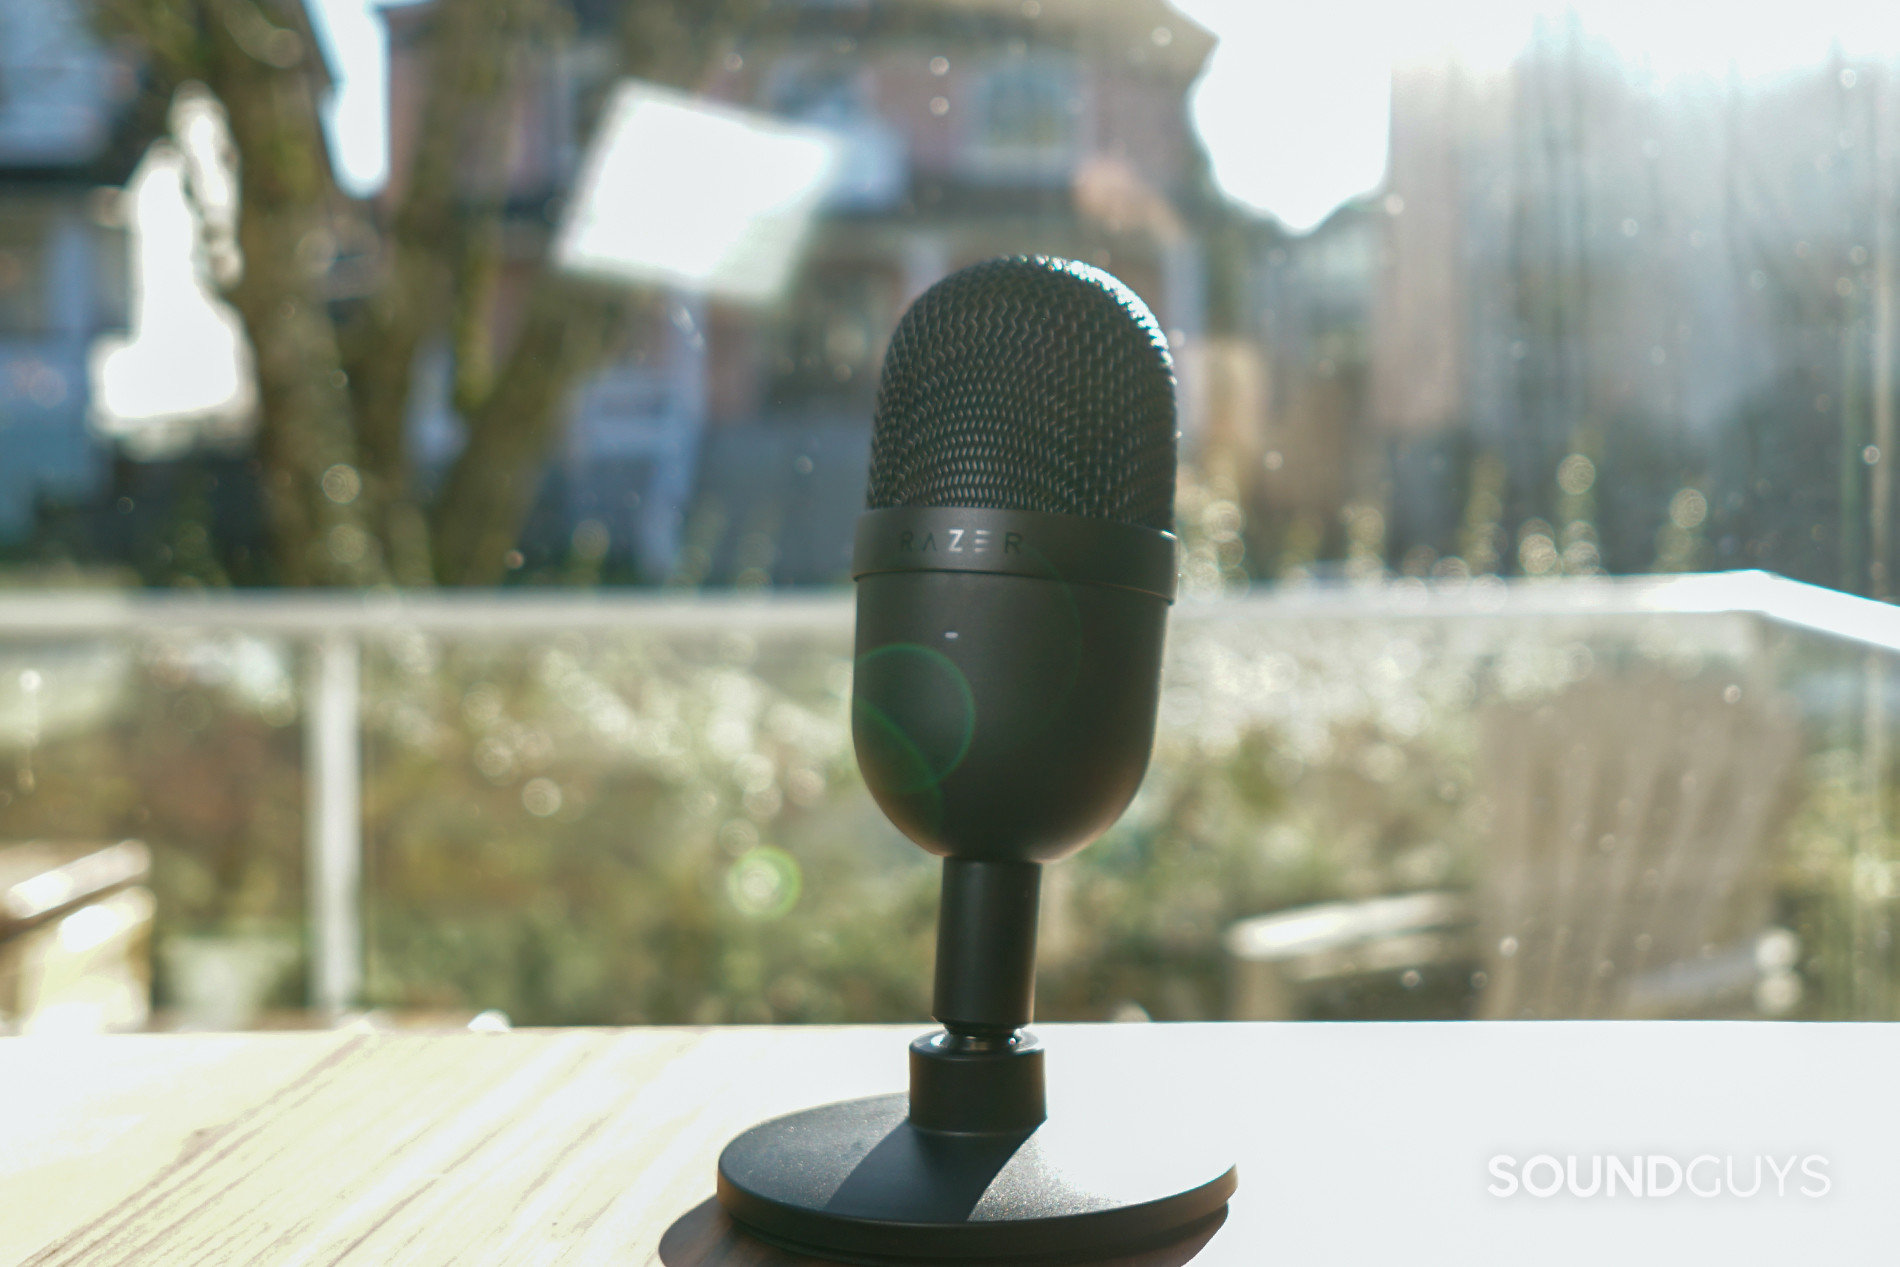 Razer Seiren Mini on a table in front of a window in the daytime.